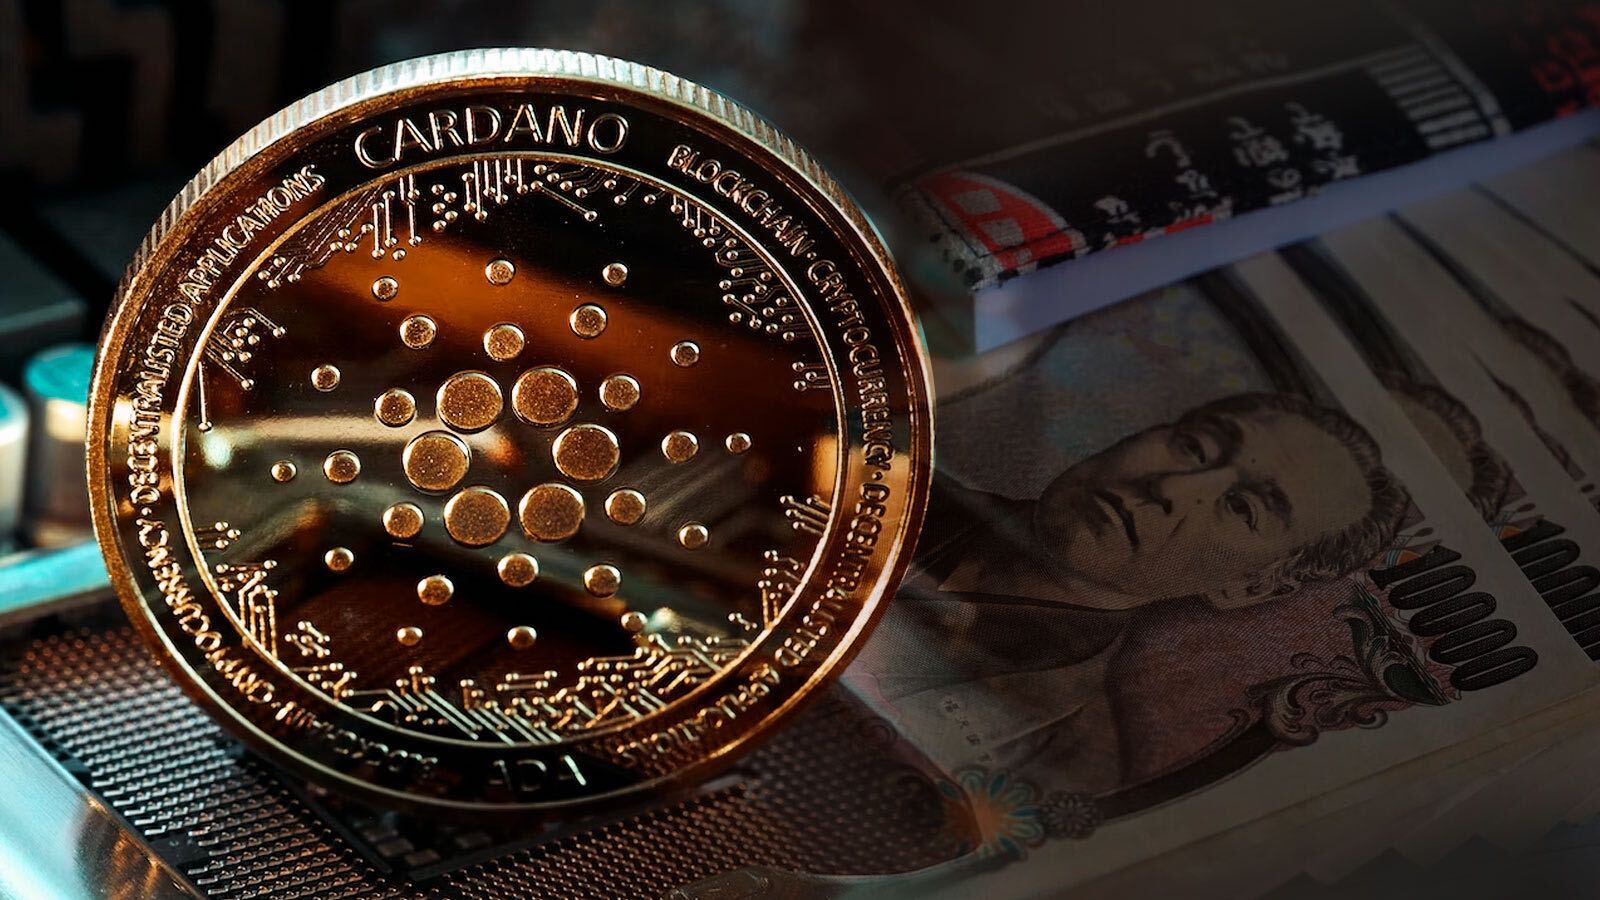 Cardano (ADA) Can Now Be Bought Directly with Japanese Yen Due to New Listing